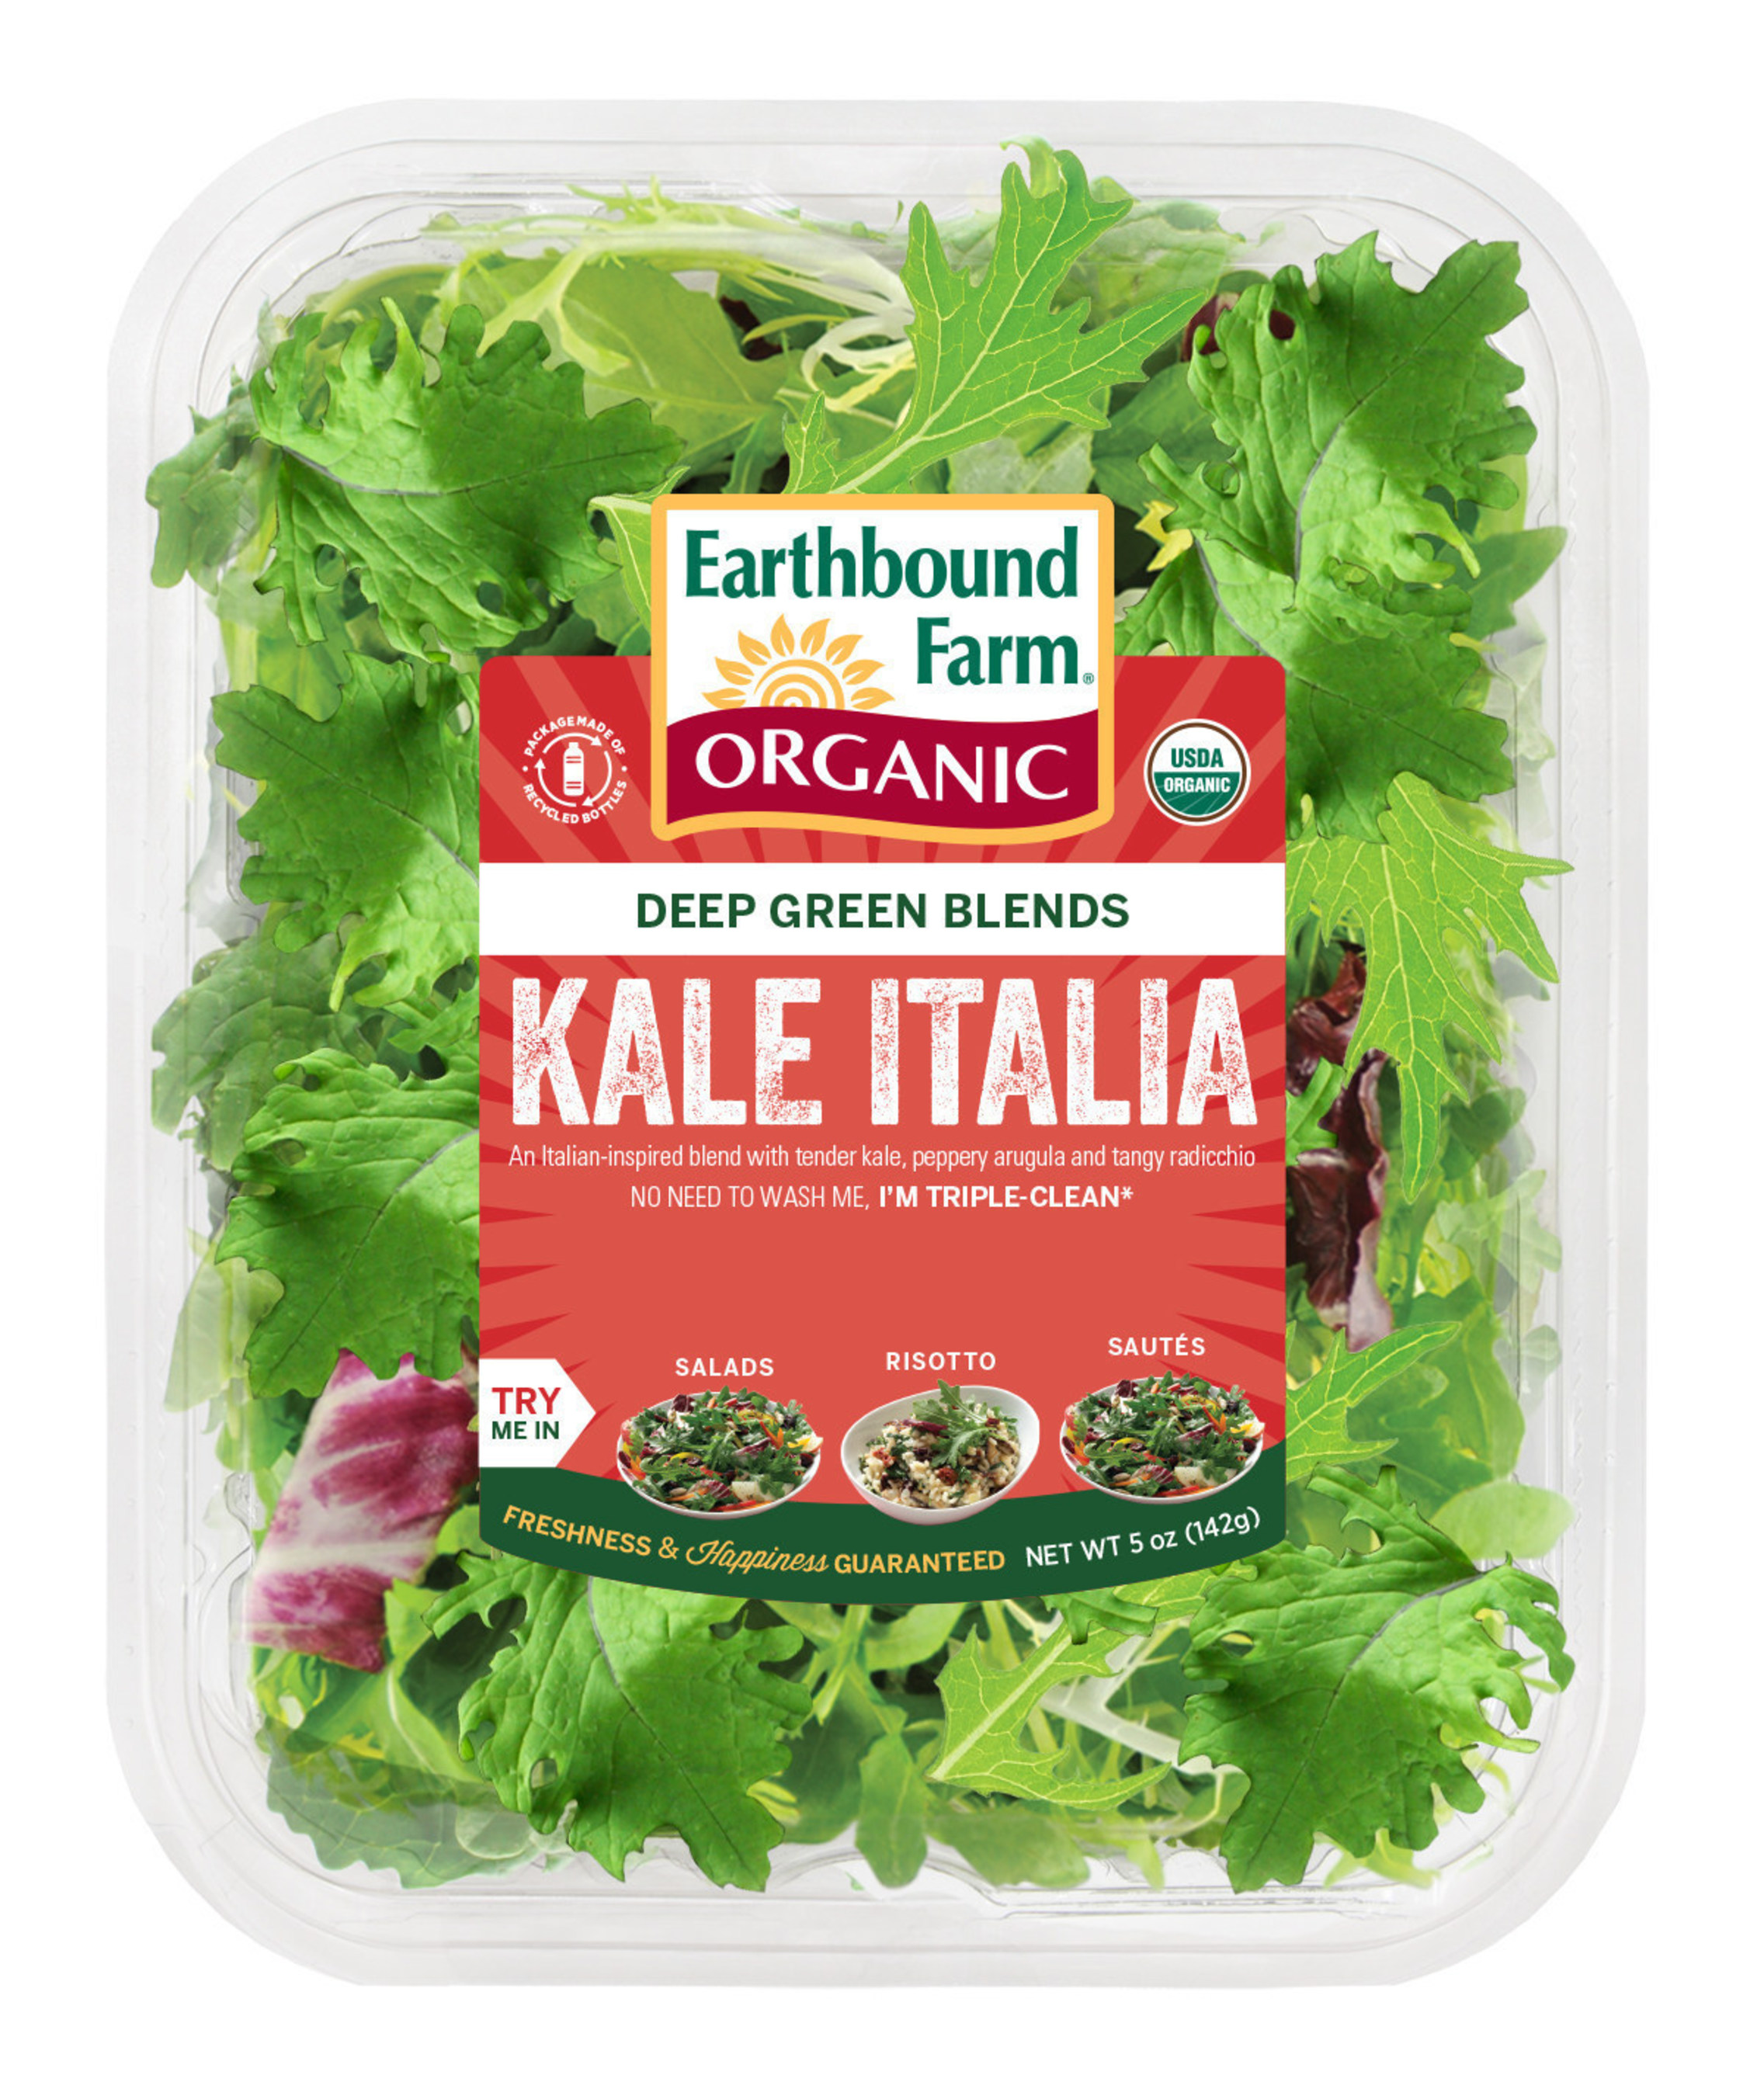 Kale trend gets a zesty kick with new organic "Kale Italia" from Earthbound Farm